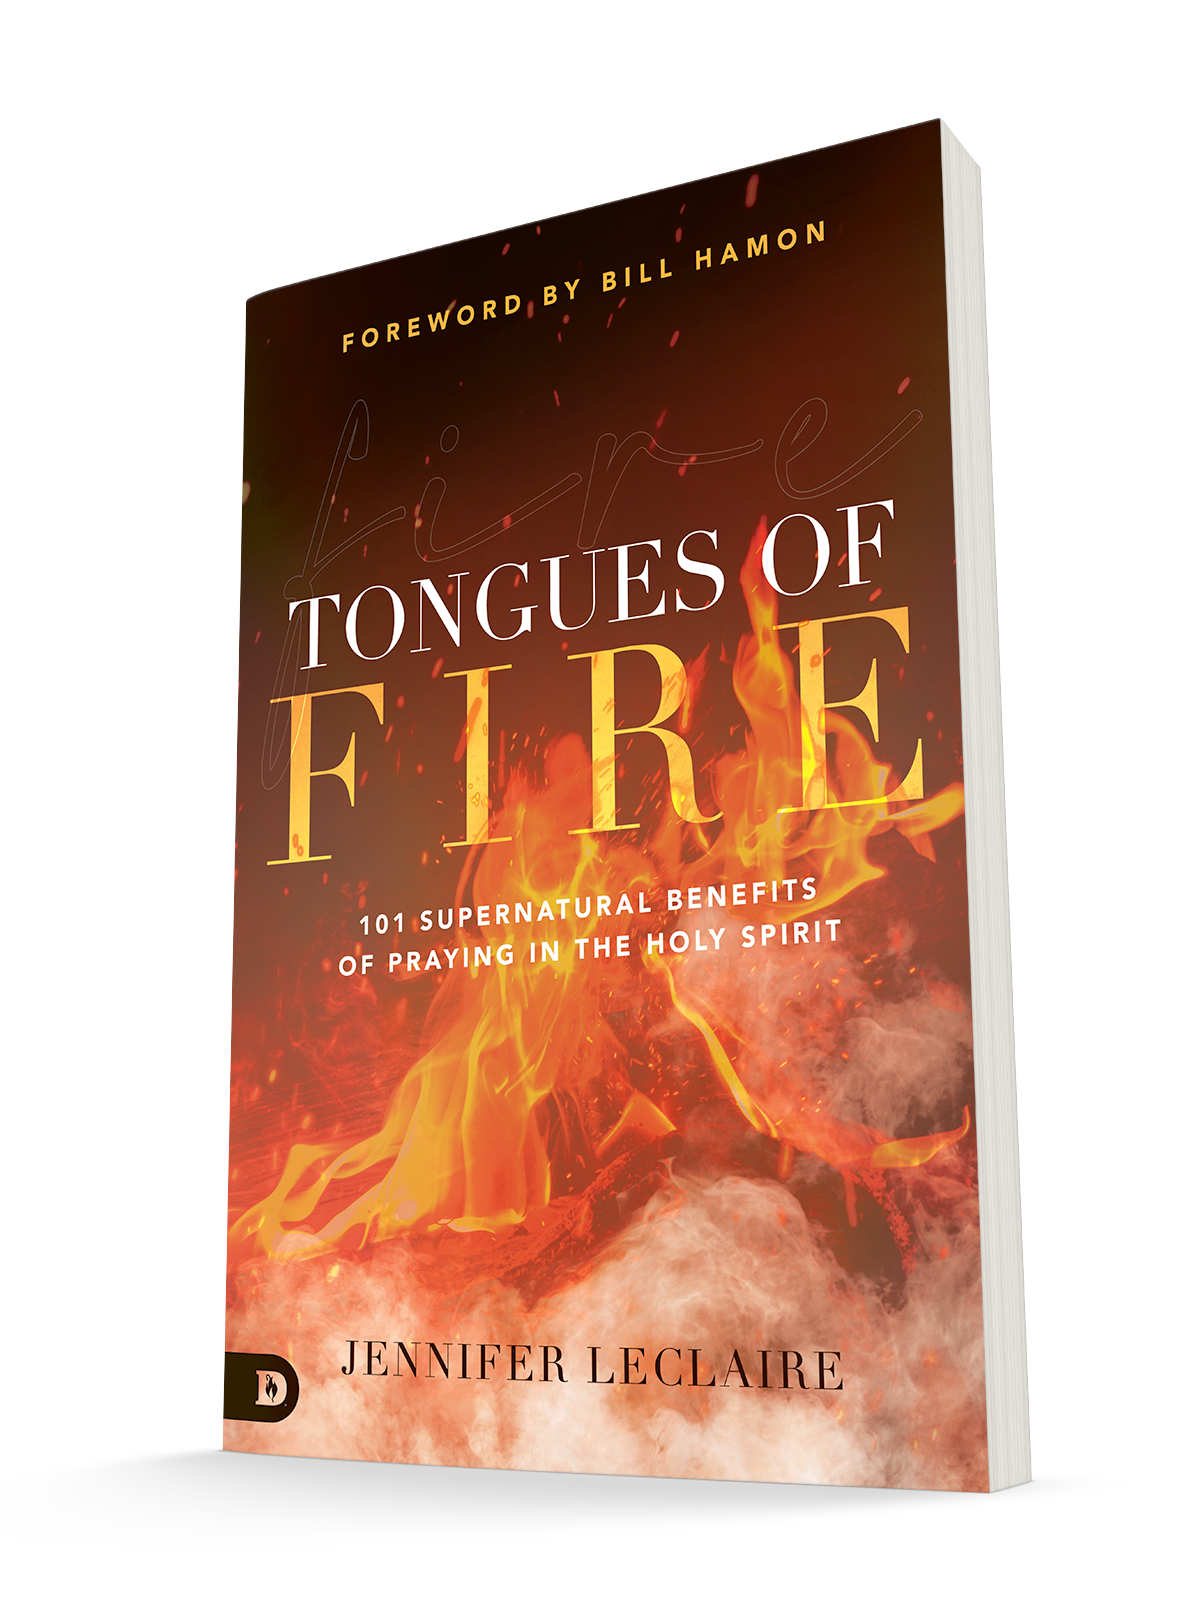 Tongues of Fire: 101 Supernatural Benefits of Praying in the Holy Spirit Paperback – April 19, 2022